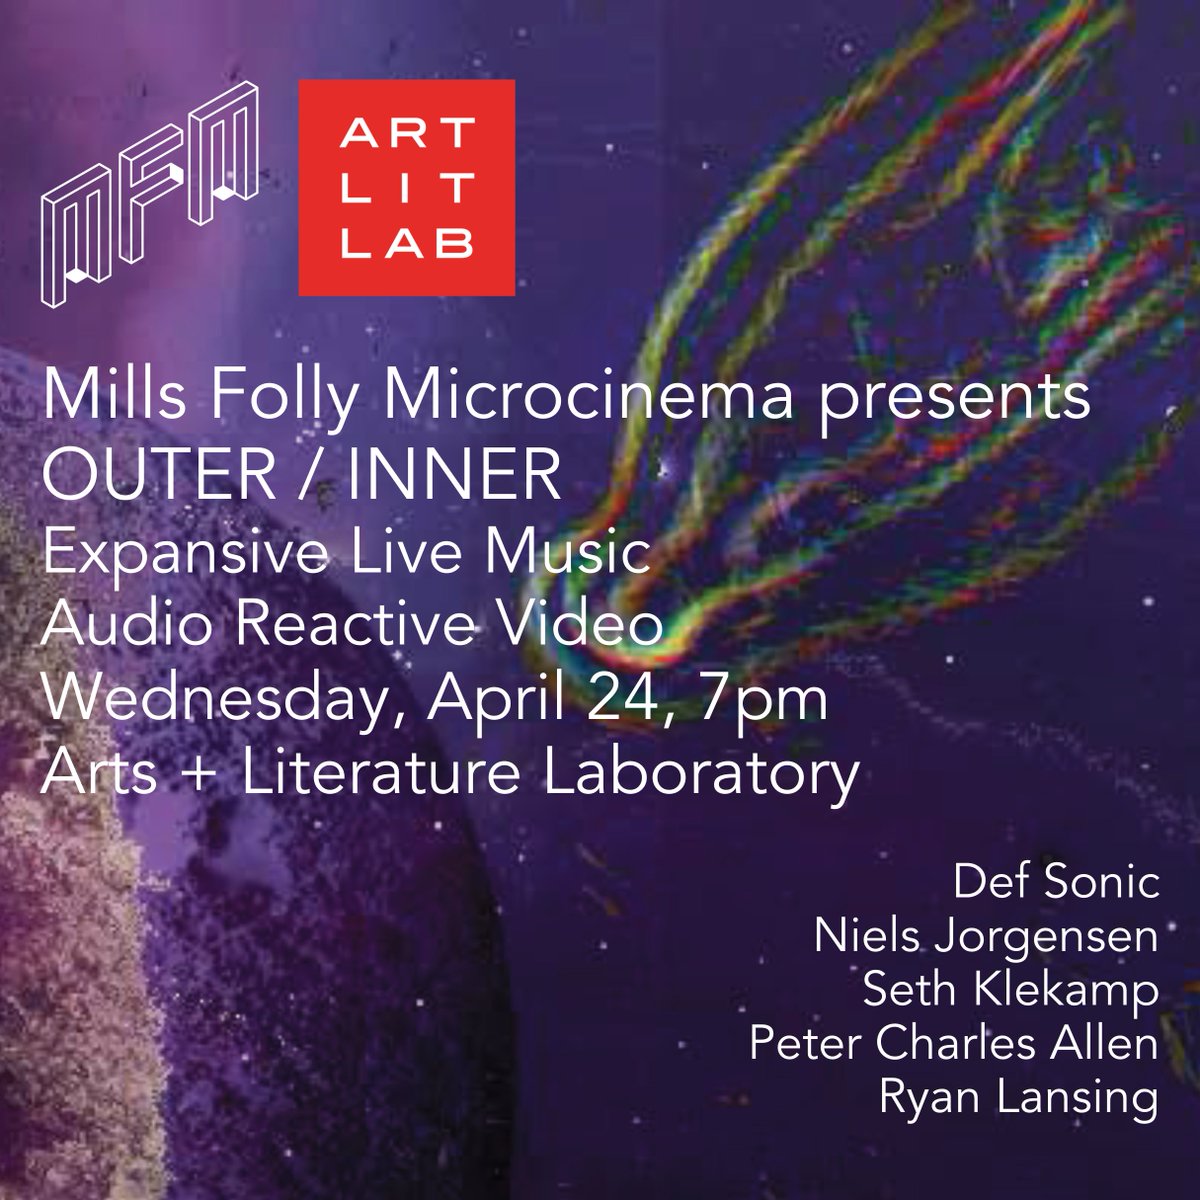 Mills Folly Microcinema presents OUTER/INNER, an evening of expansive music and audio reactive video on Wednesday, April 24, 7pm. Music by Def Sonic, Niels Jorgensen, Seth Klekamp; images by Peter Charles Allen and Ryan Lansing. Tickets available now! loom.ly/FDQ7sjI